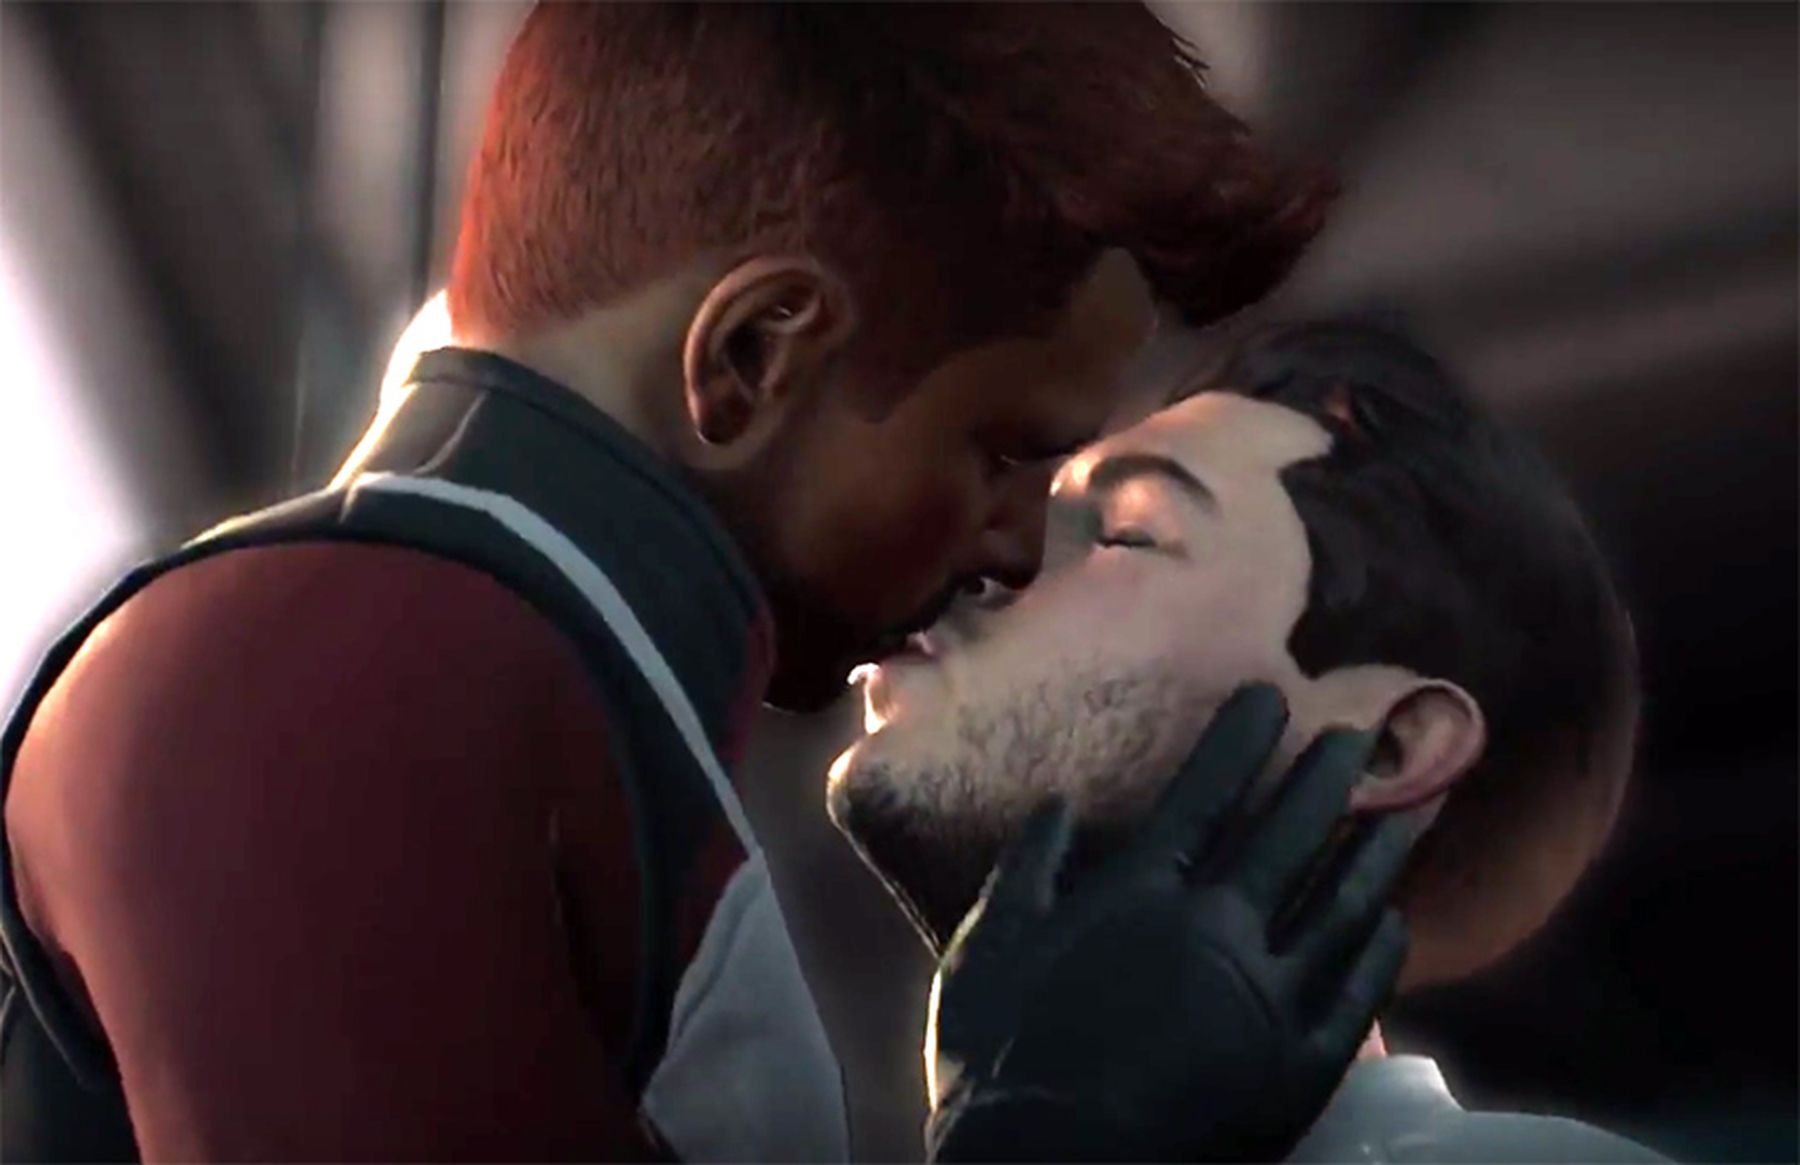 andrew bitton recommends Mass Effect Sex Pics